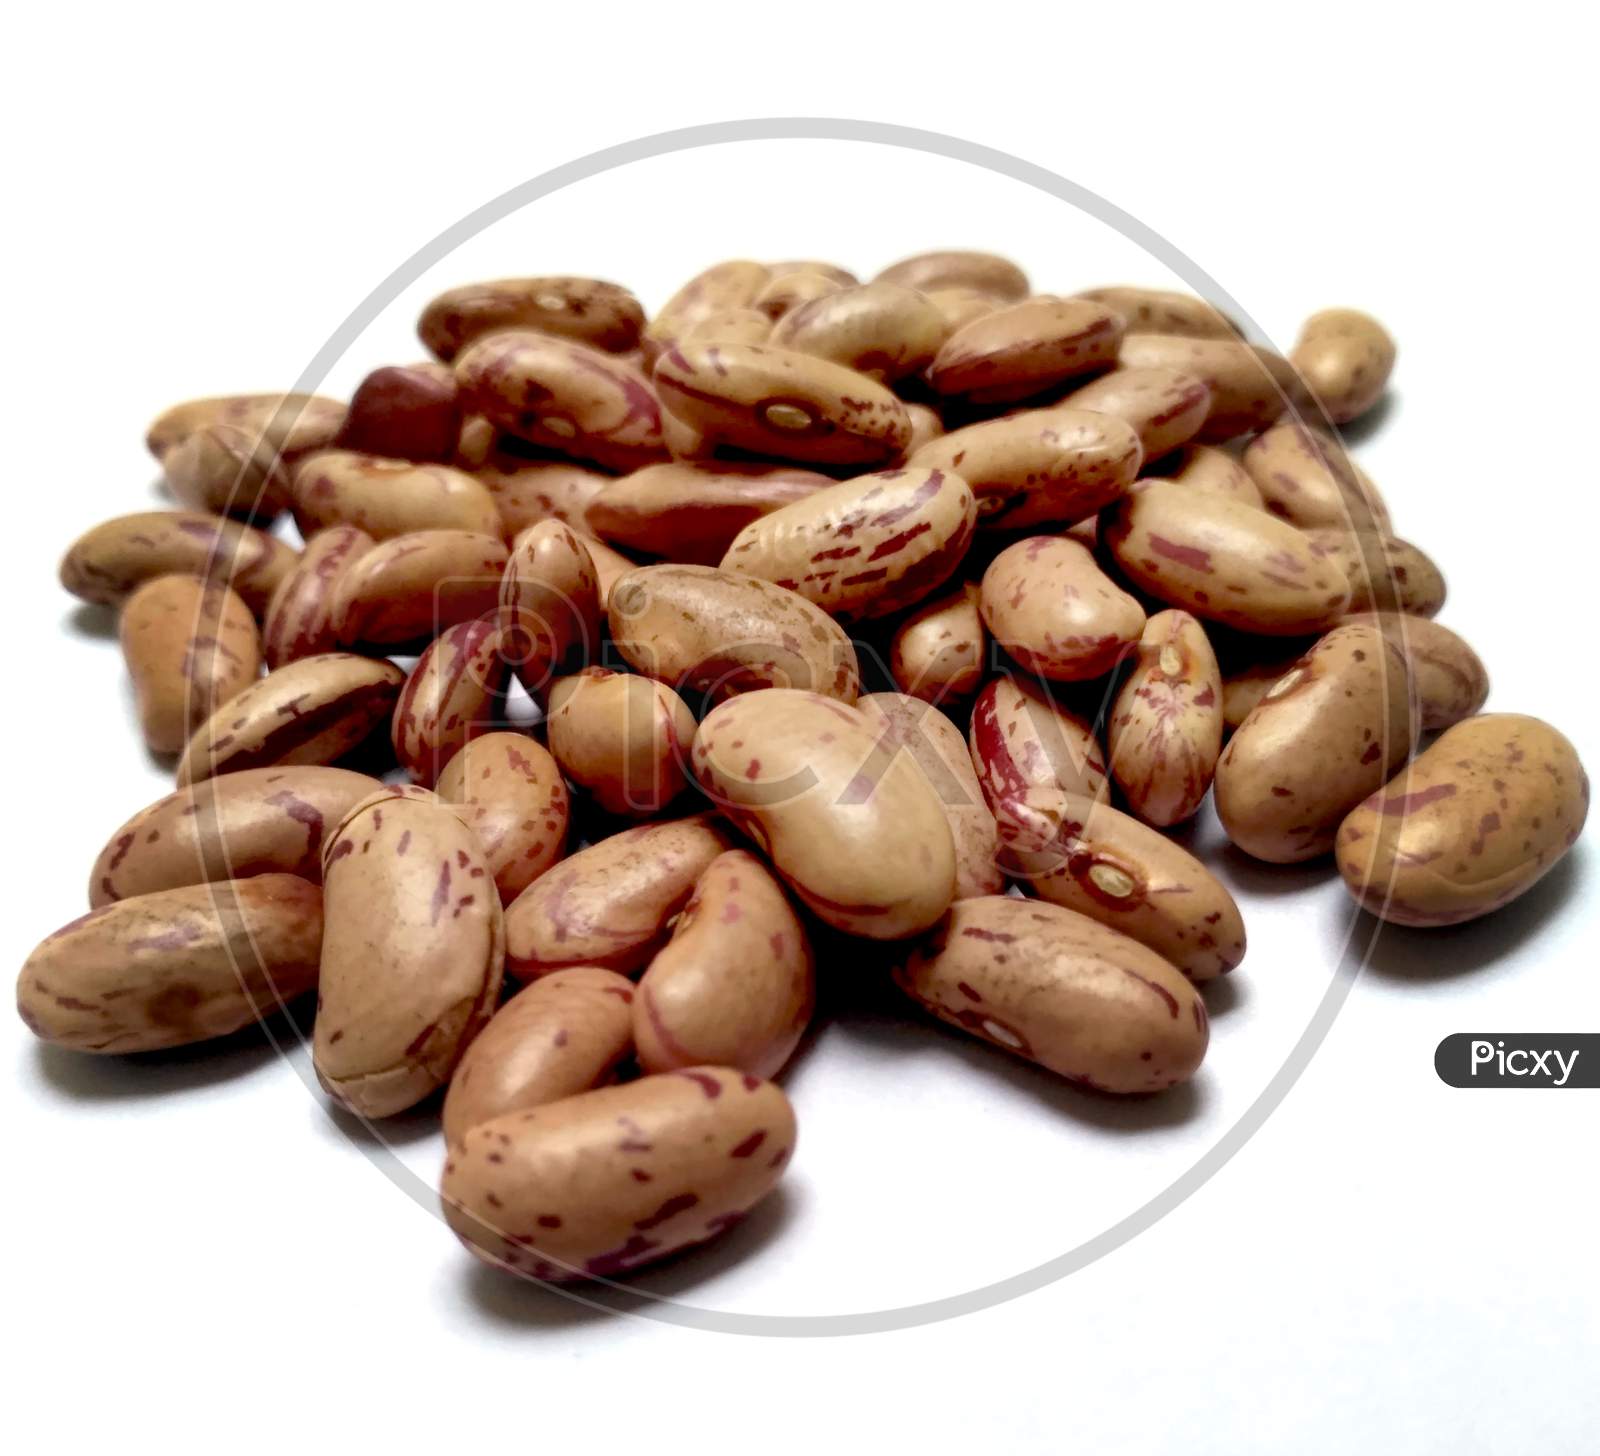 Red Kidney Beans Also Know As Azuki Beans Or Rajma Seeds Isolated On White Background